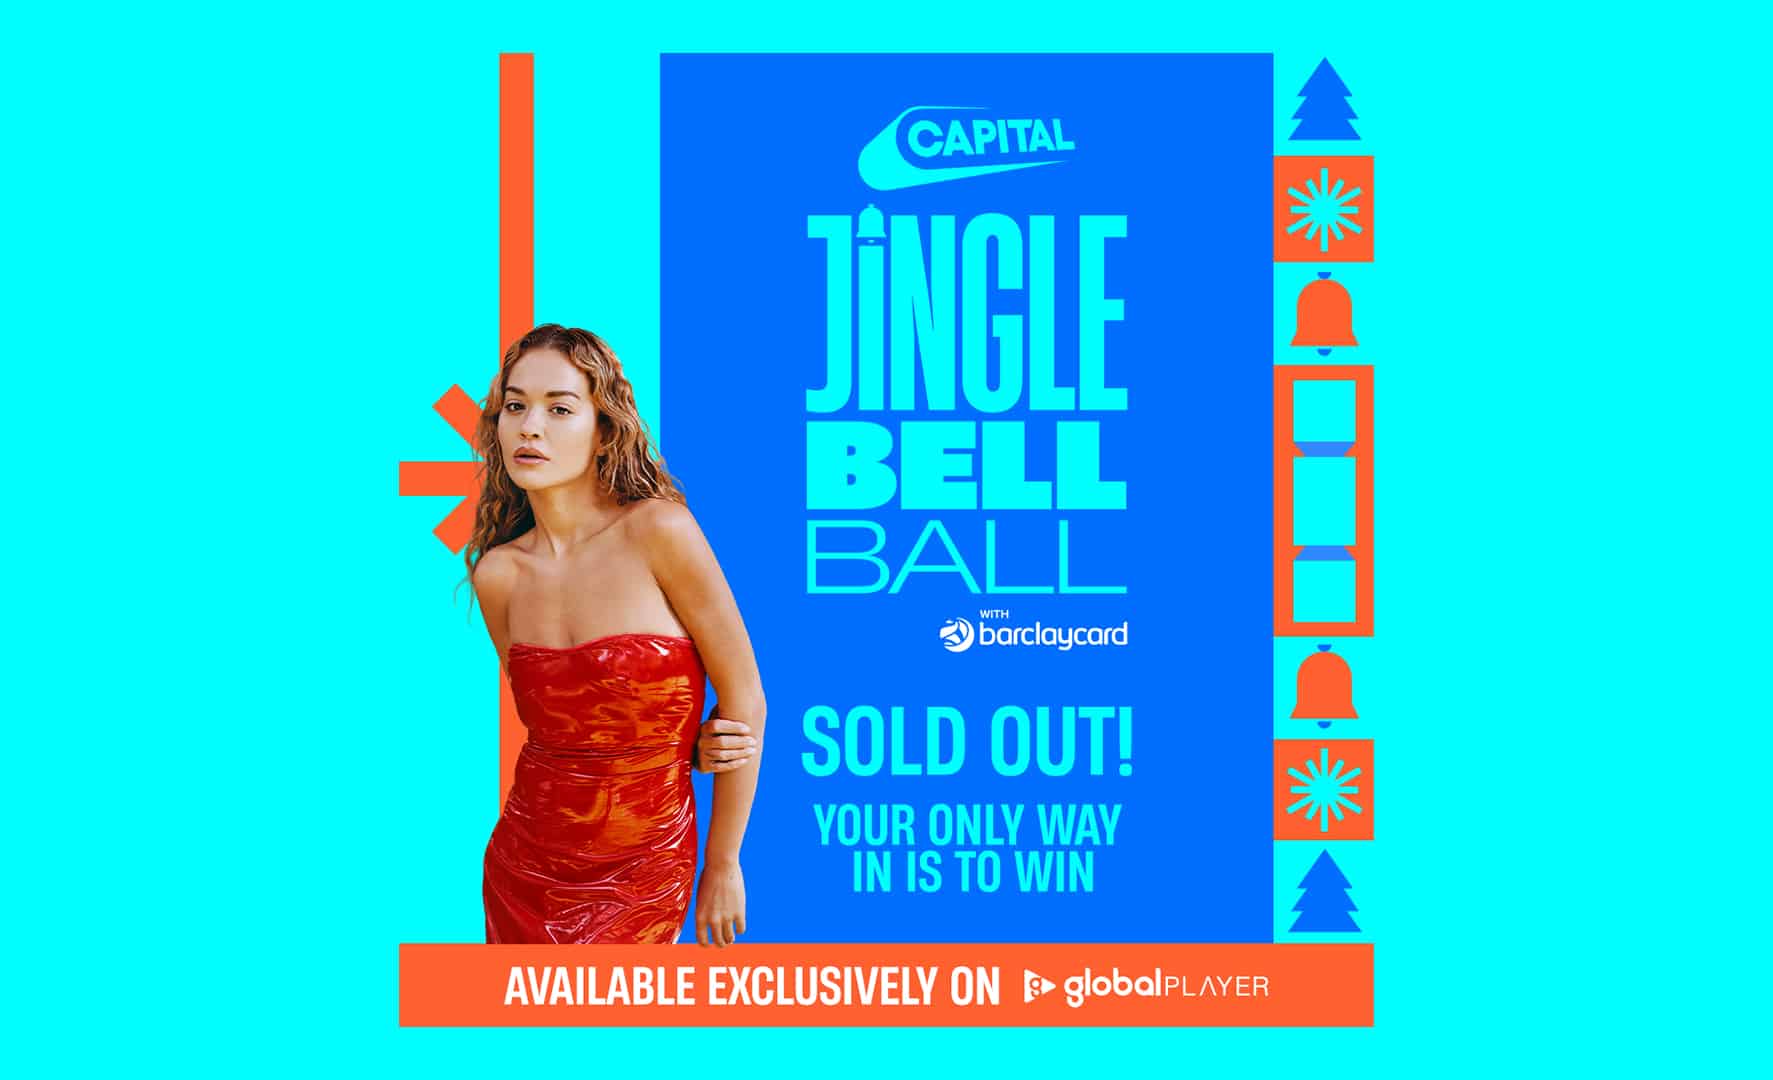 Capital’s Jingle Bell Ball with Barclaycard sells out in just a matter of hours!